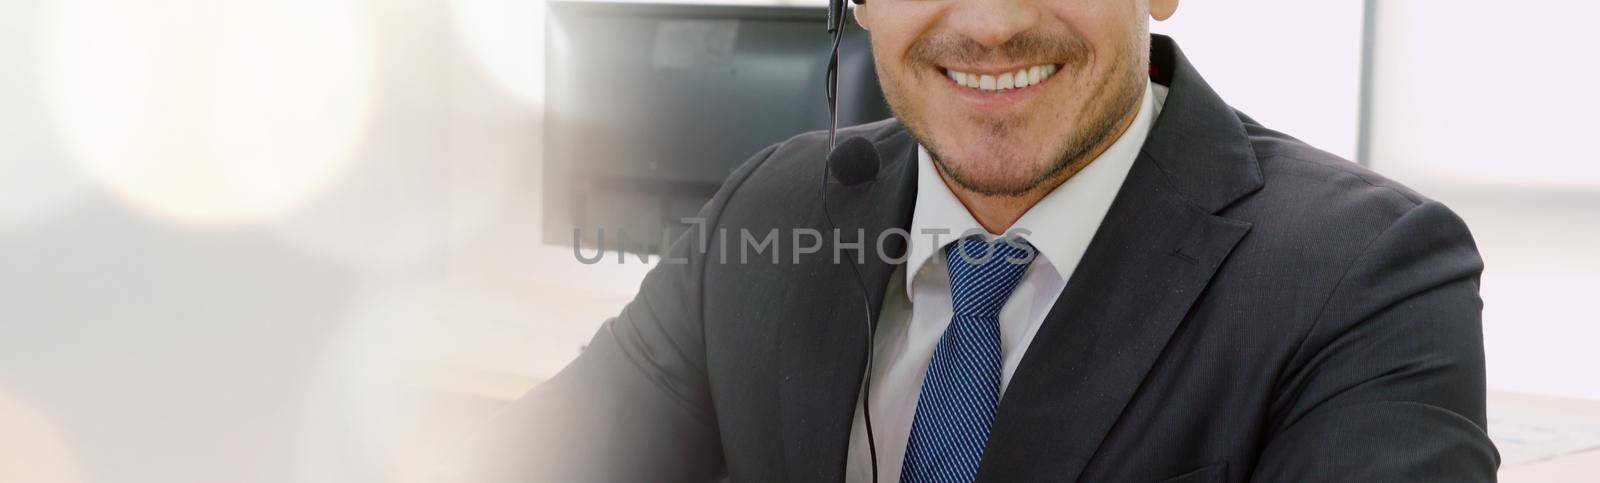 Call center or customer support agent in broaden view panorama banner wearing headset while working at office to support remote customer or colleague on telephone video conference call